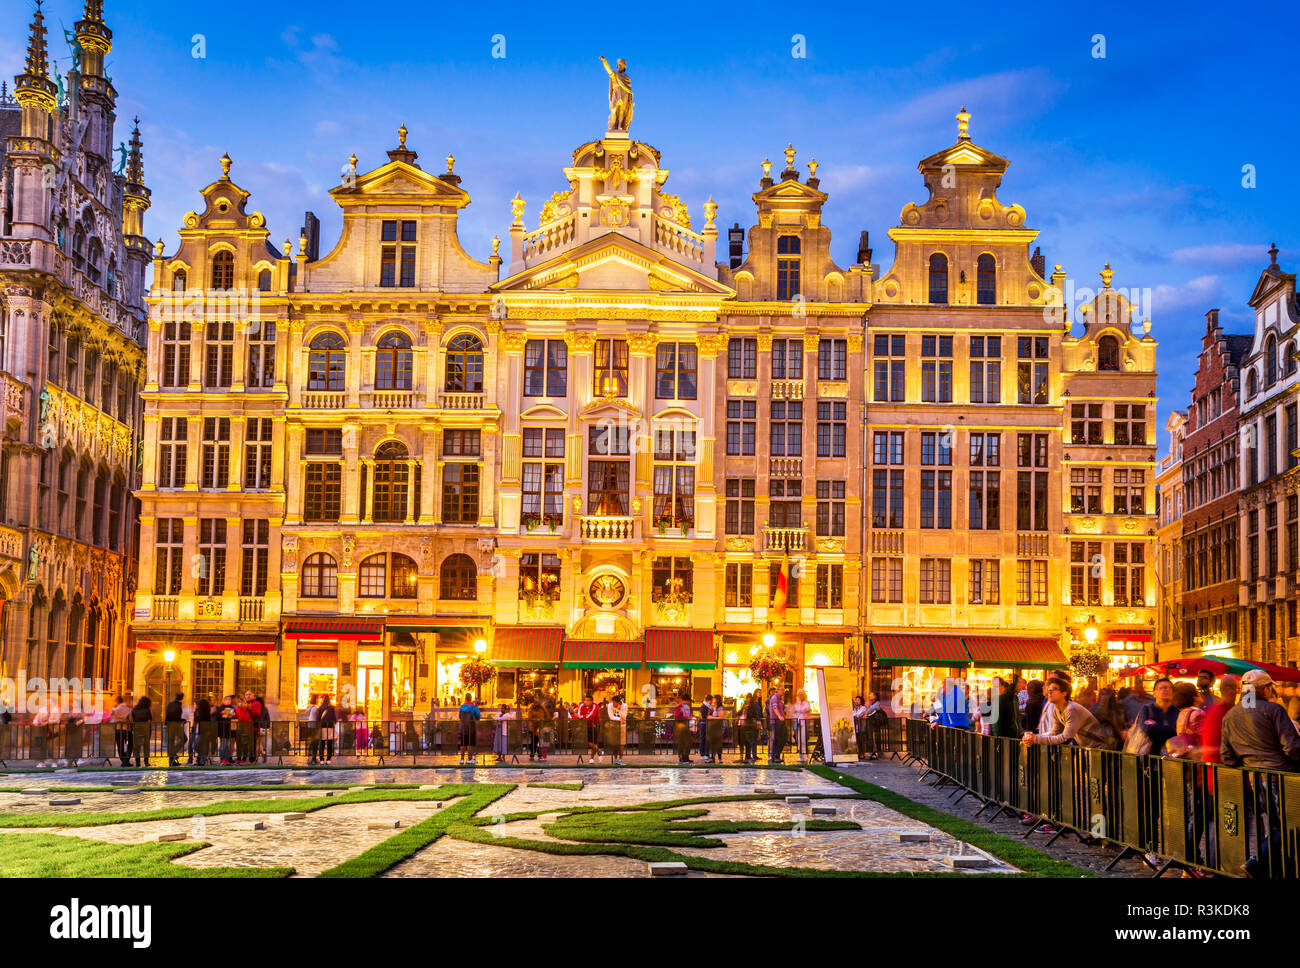 Bruxelles, Belgium. Night image with medieval architecture in Grand Place (Grote Markt). Stock Photo